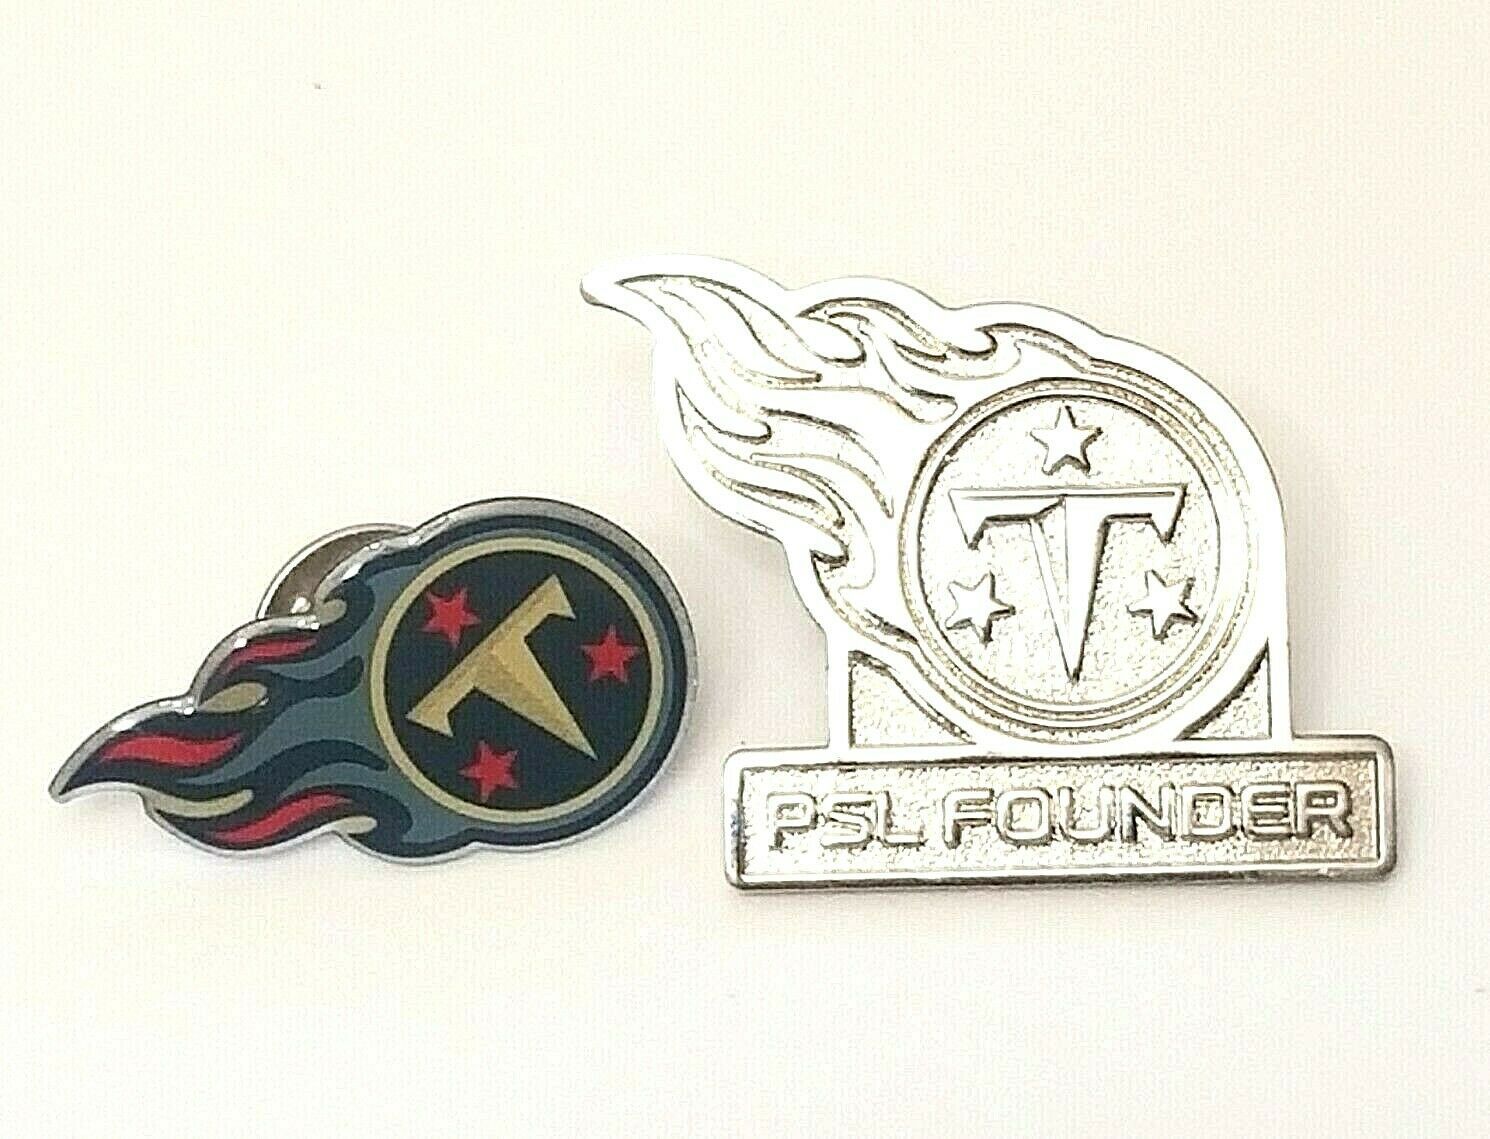 Primary image for Lot of 2 Tennessee Titans Logo Lapel Pin NFL Football Team Logo PSl Founder Pin